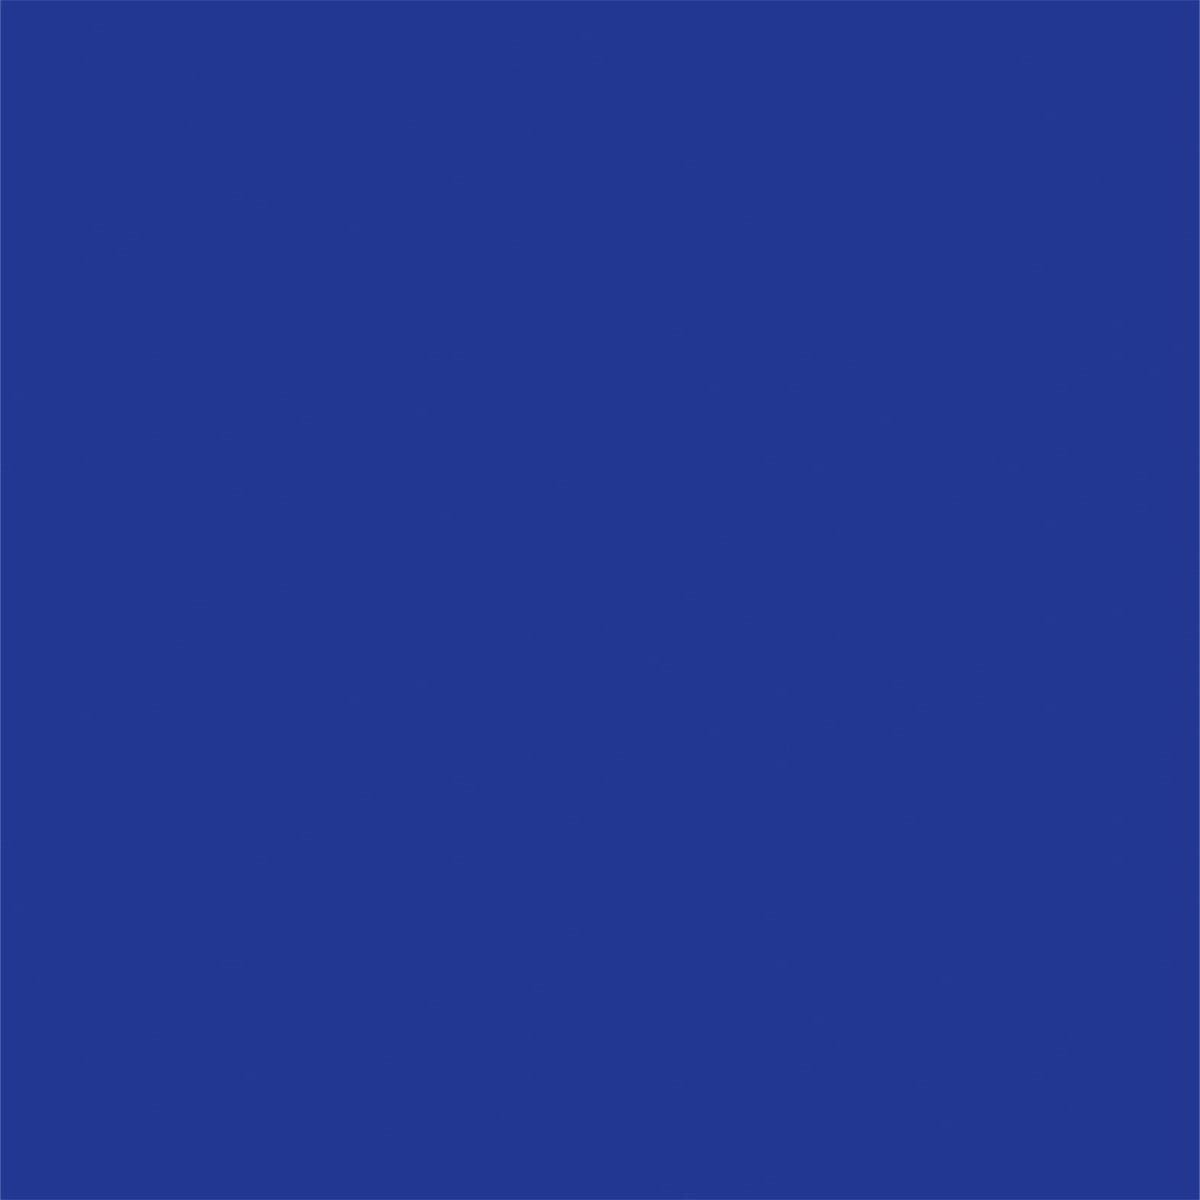 Navy Blue Solid Fabric Photography Backdorps for Studio